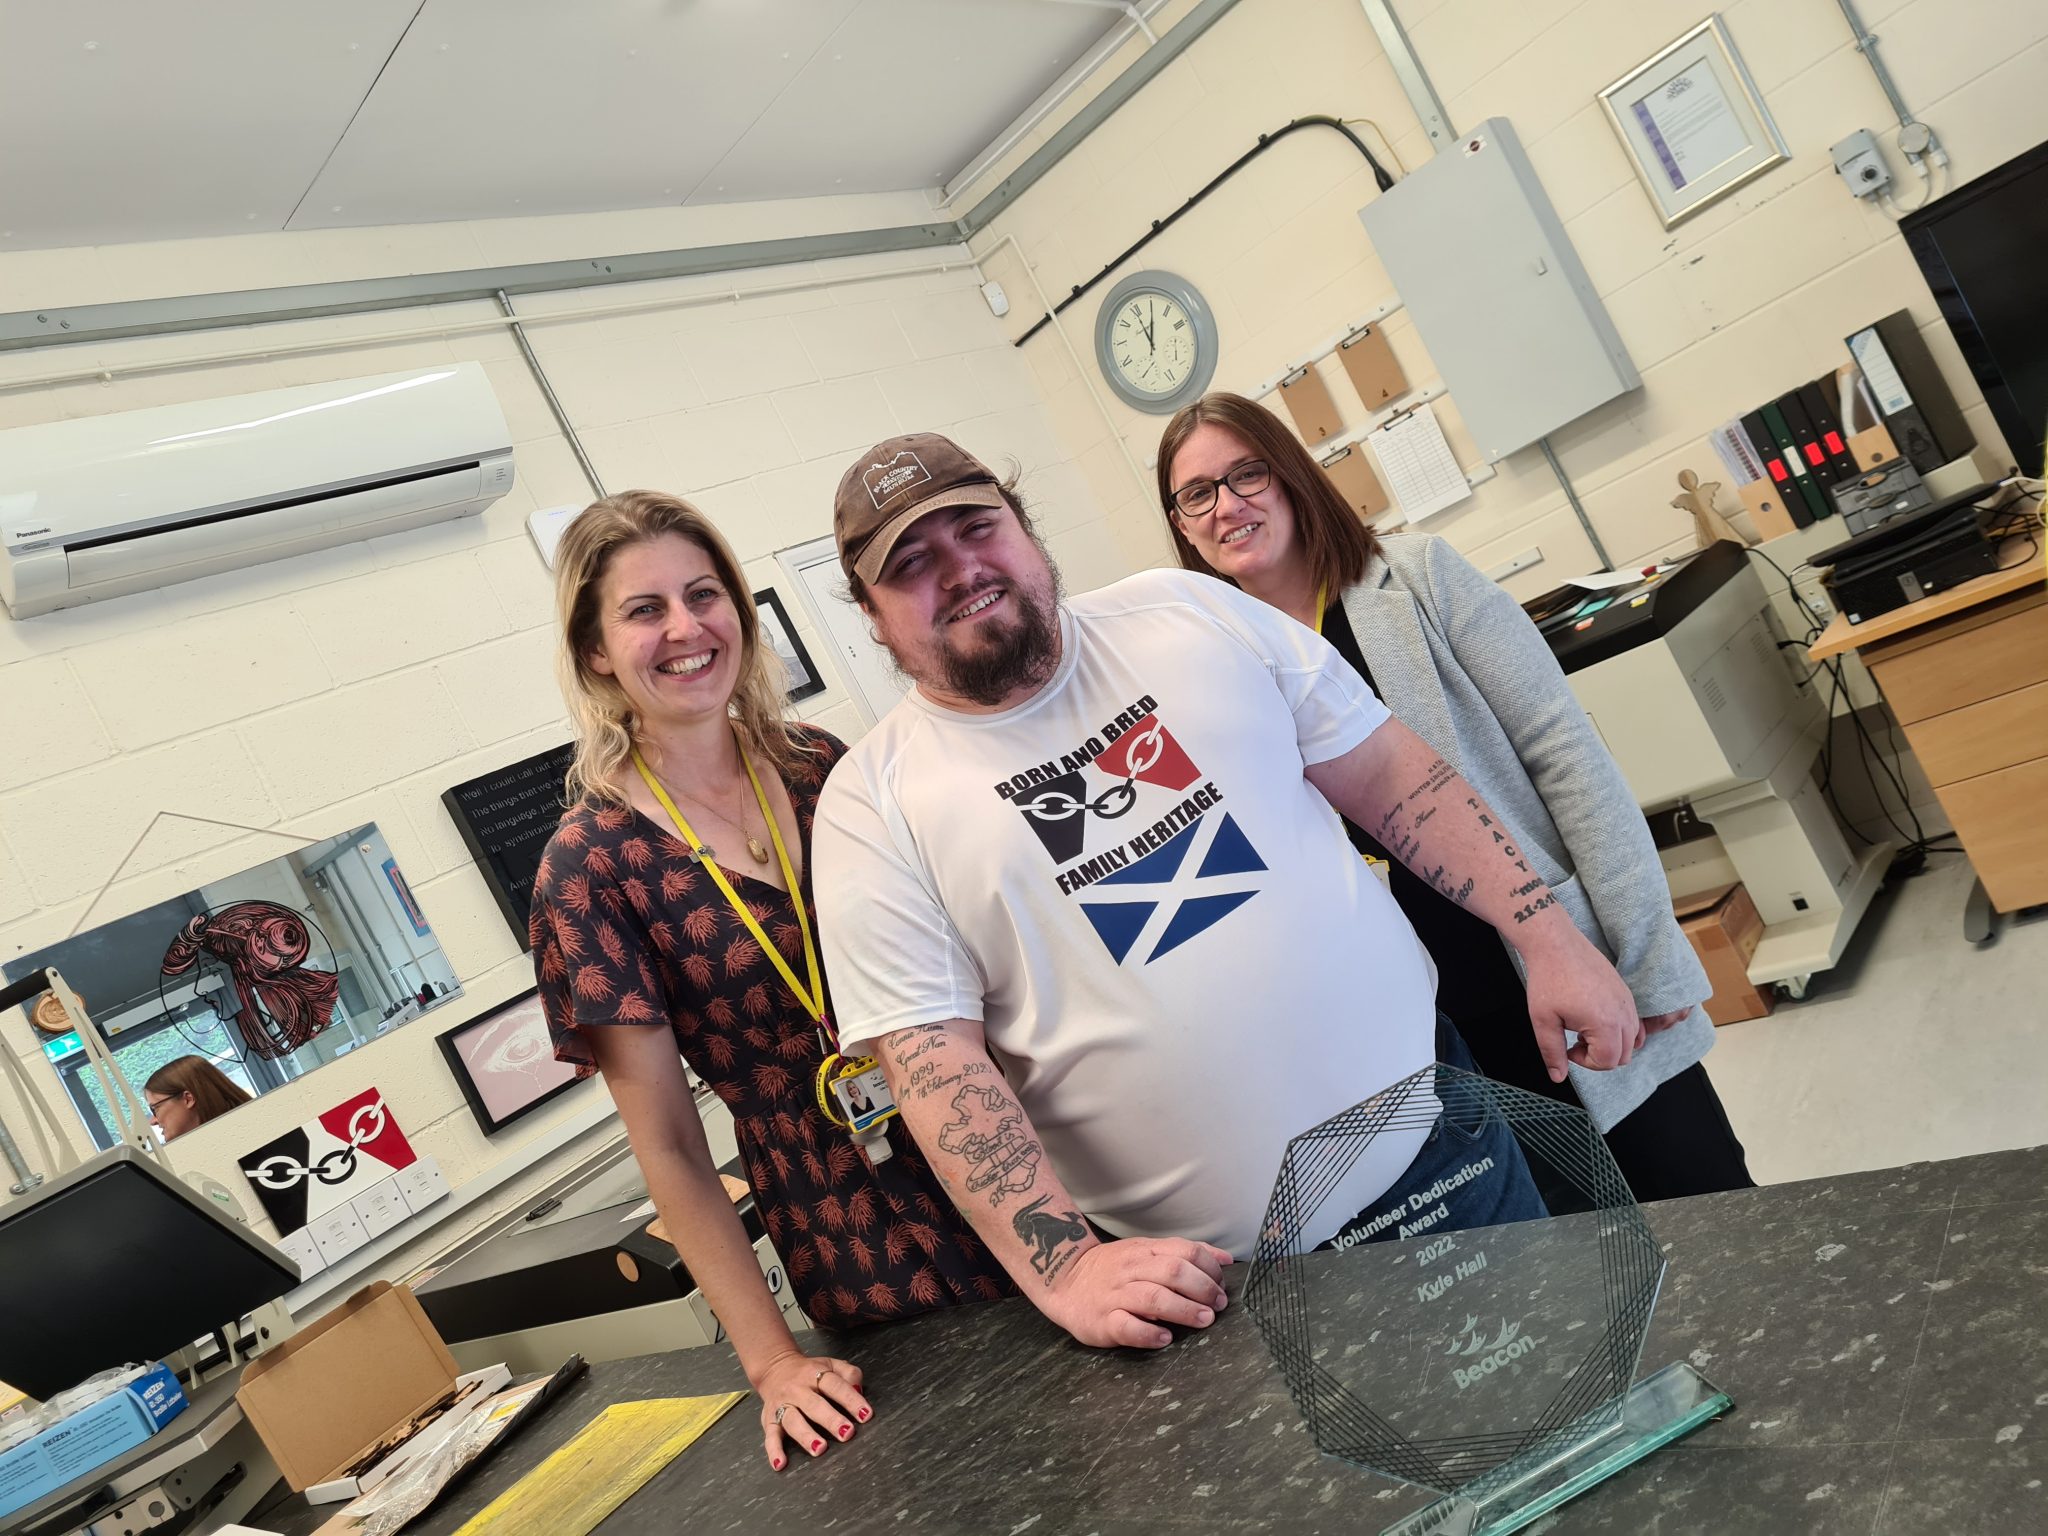 Here's our chief executive Lisa on the left, volunteer Kyle in the middle and Debbie our People Manager on the right. They are stood in our Fab Lab and on the worktop in front of Kyle is his award, made of glass and hexagon shape.